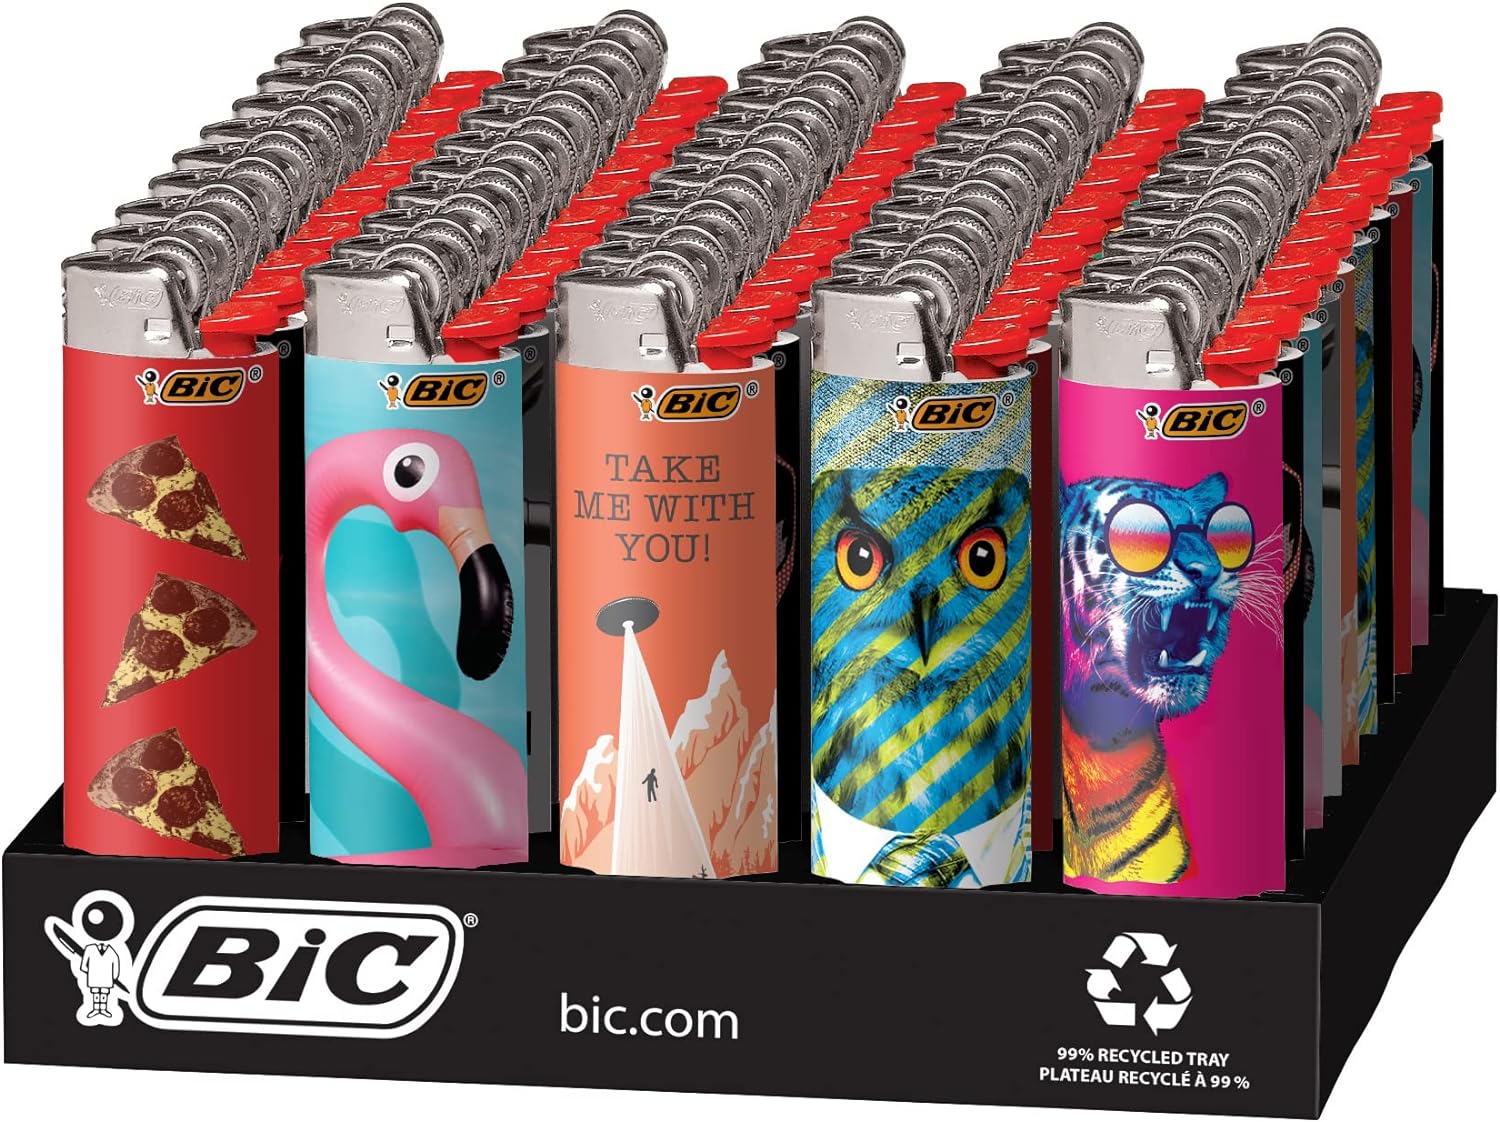 BIC Pocket Lighter, Special Edition Favorites Collection, Assorted Unique Lighter Designs, 50 Count Tray of Lighters